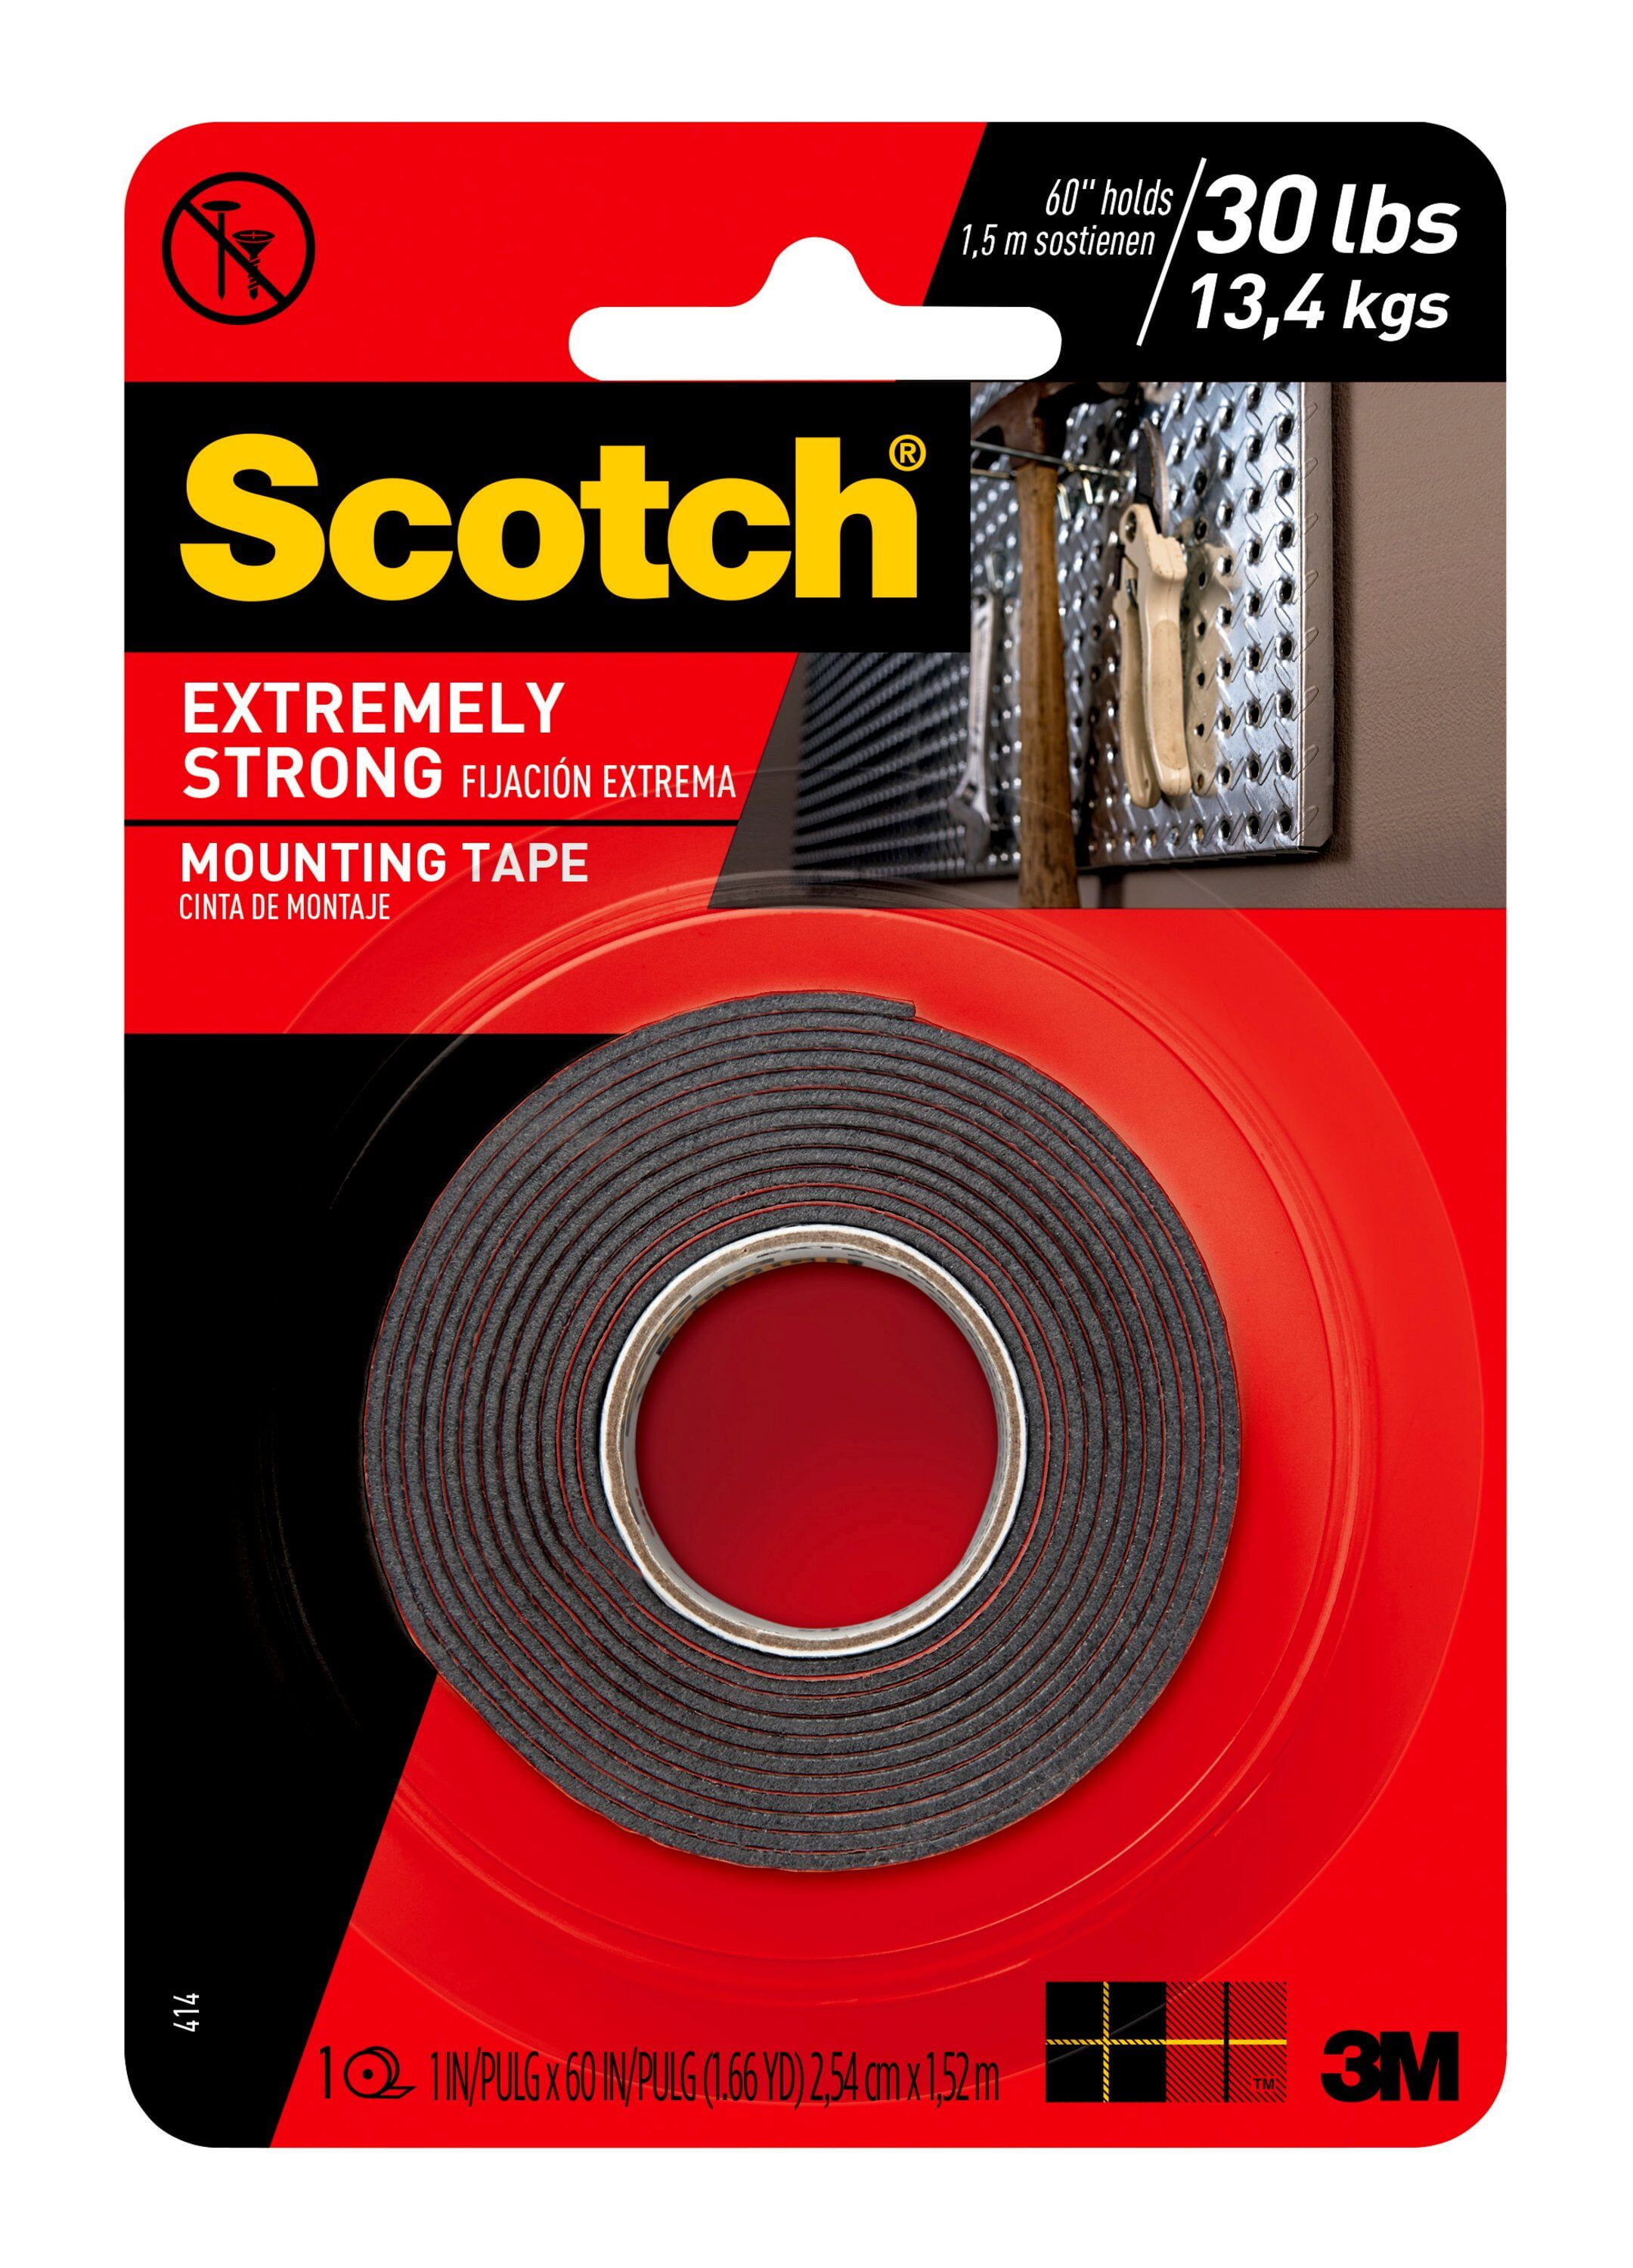 Scotch Mounting Tape Squares 3M 108 Removable 16 Double-Sided Adhesive Foam  Gray, 4 Pack 